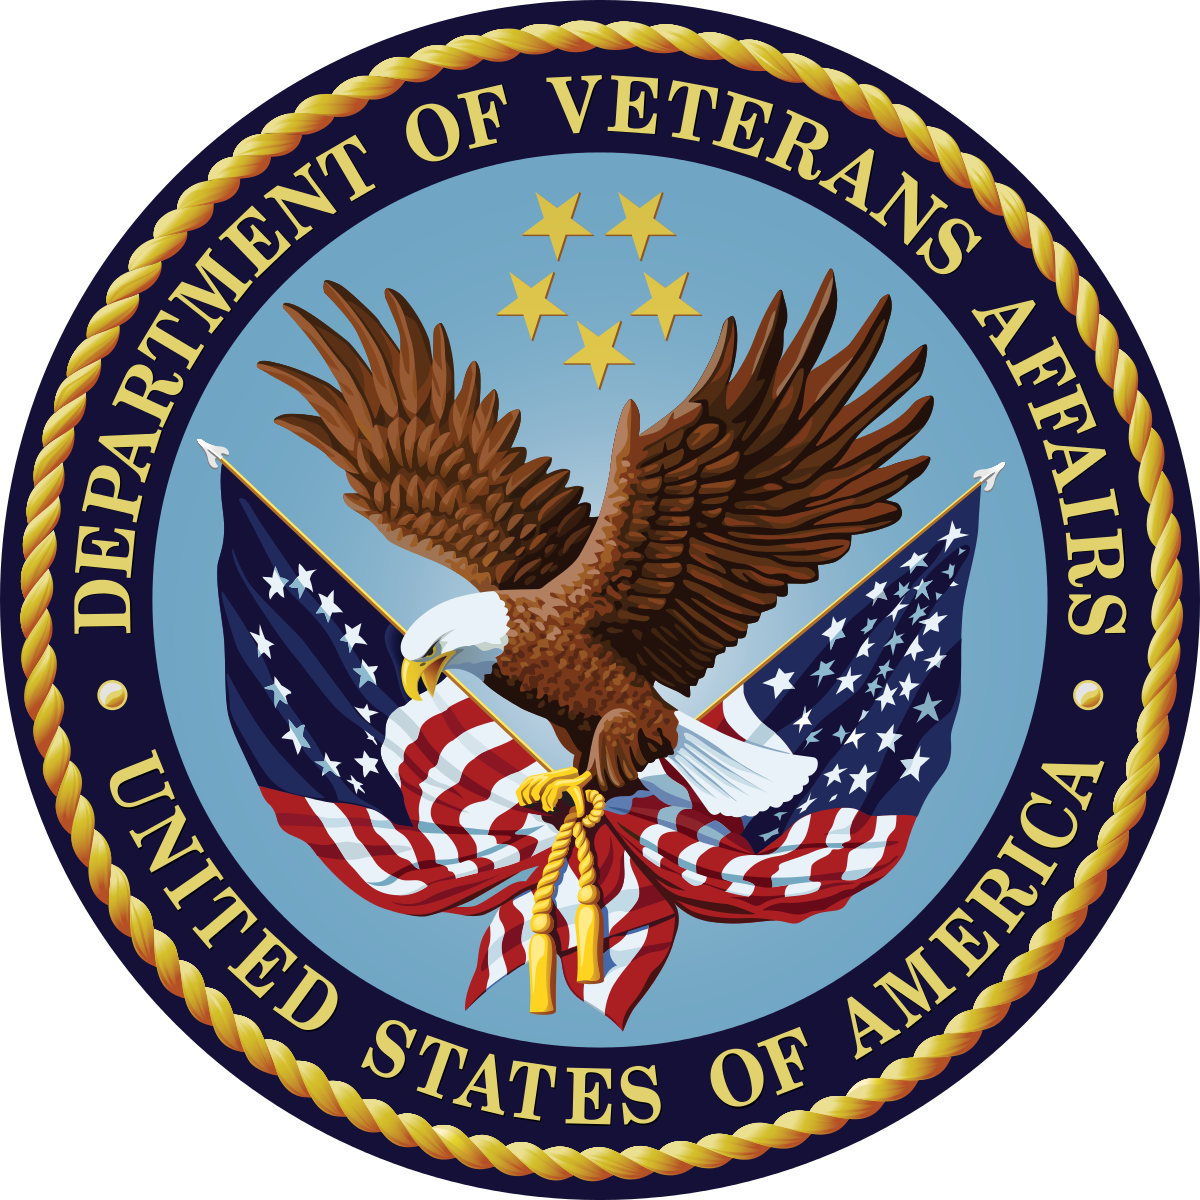 The VA’s recent policy change allows ODs nationwide to practice according to the scope of their state of licensure.